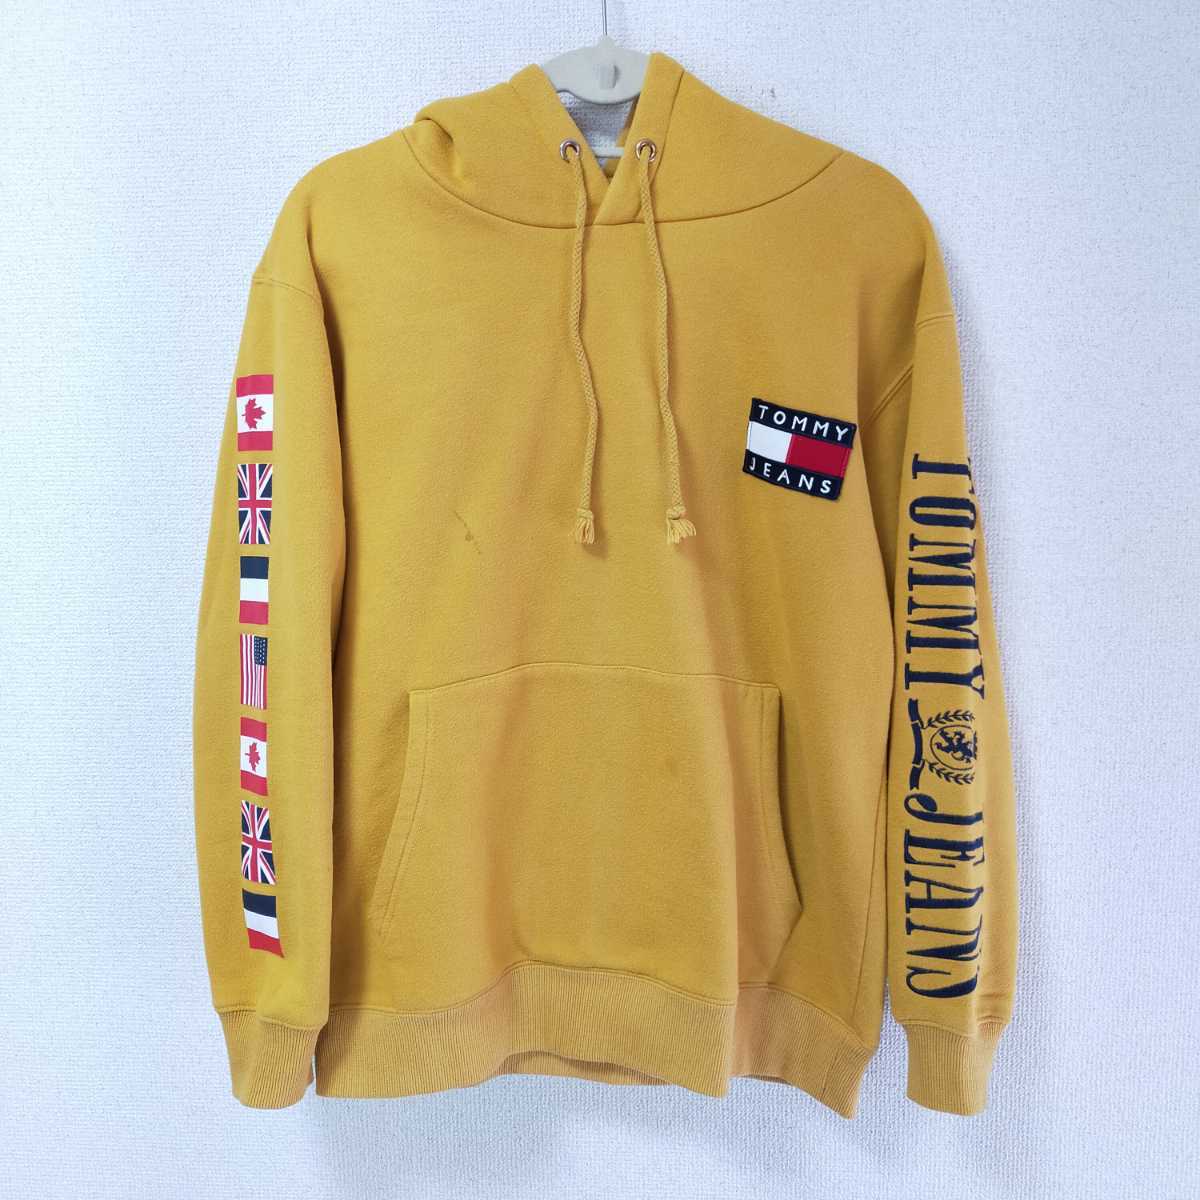 Tommy Jeans トミー ジーンズ フラッグロゴフーディ パーカー 90s 国旗 スウェット Tommy Hilfiger トミー ヒルフィガー  S イエロー